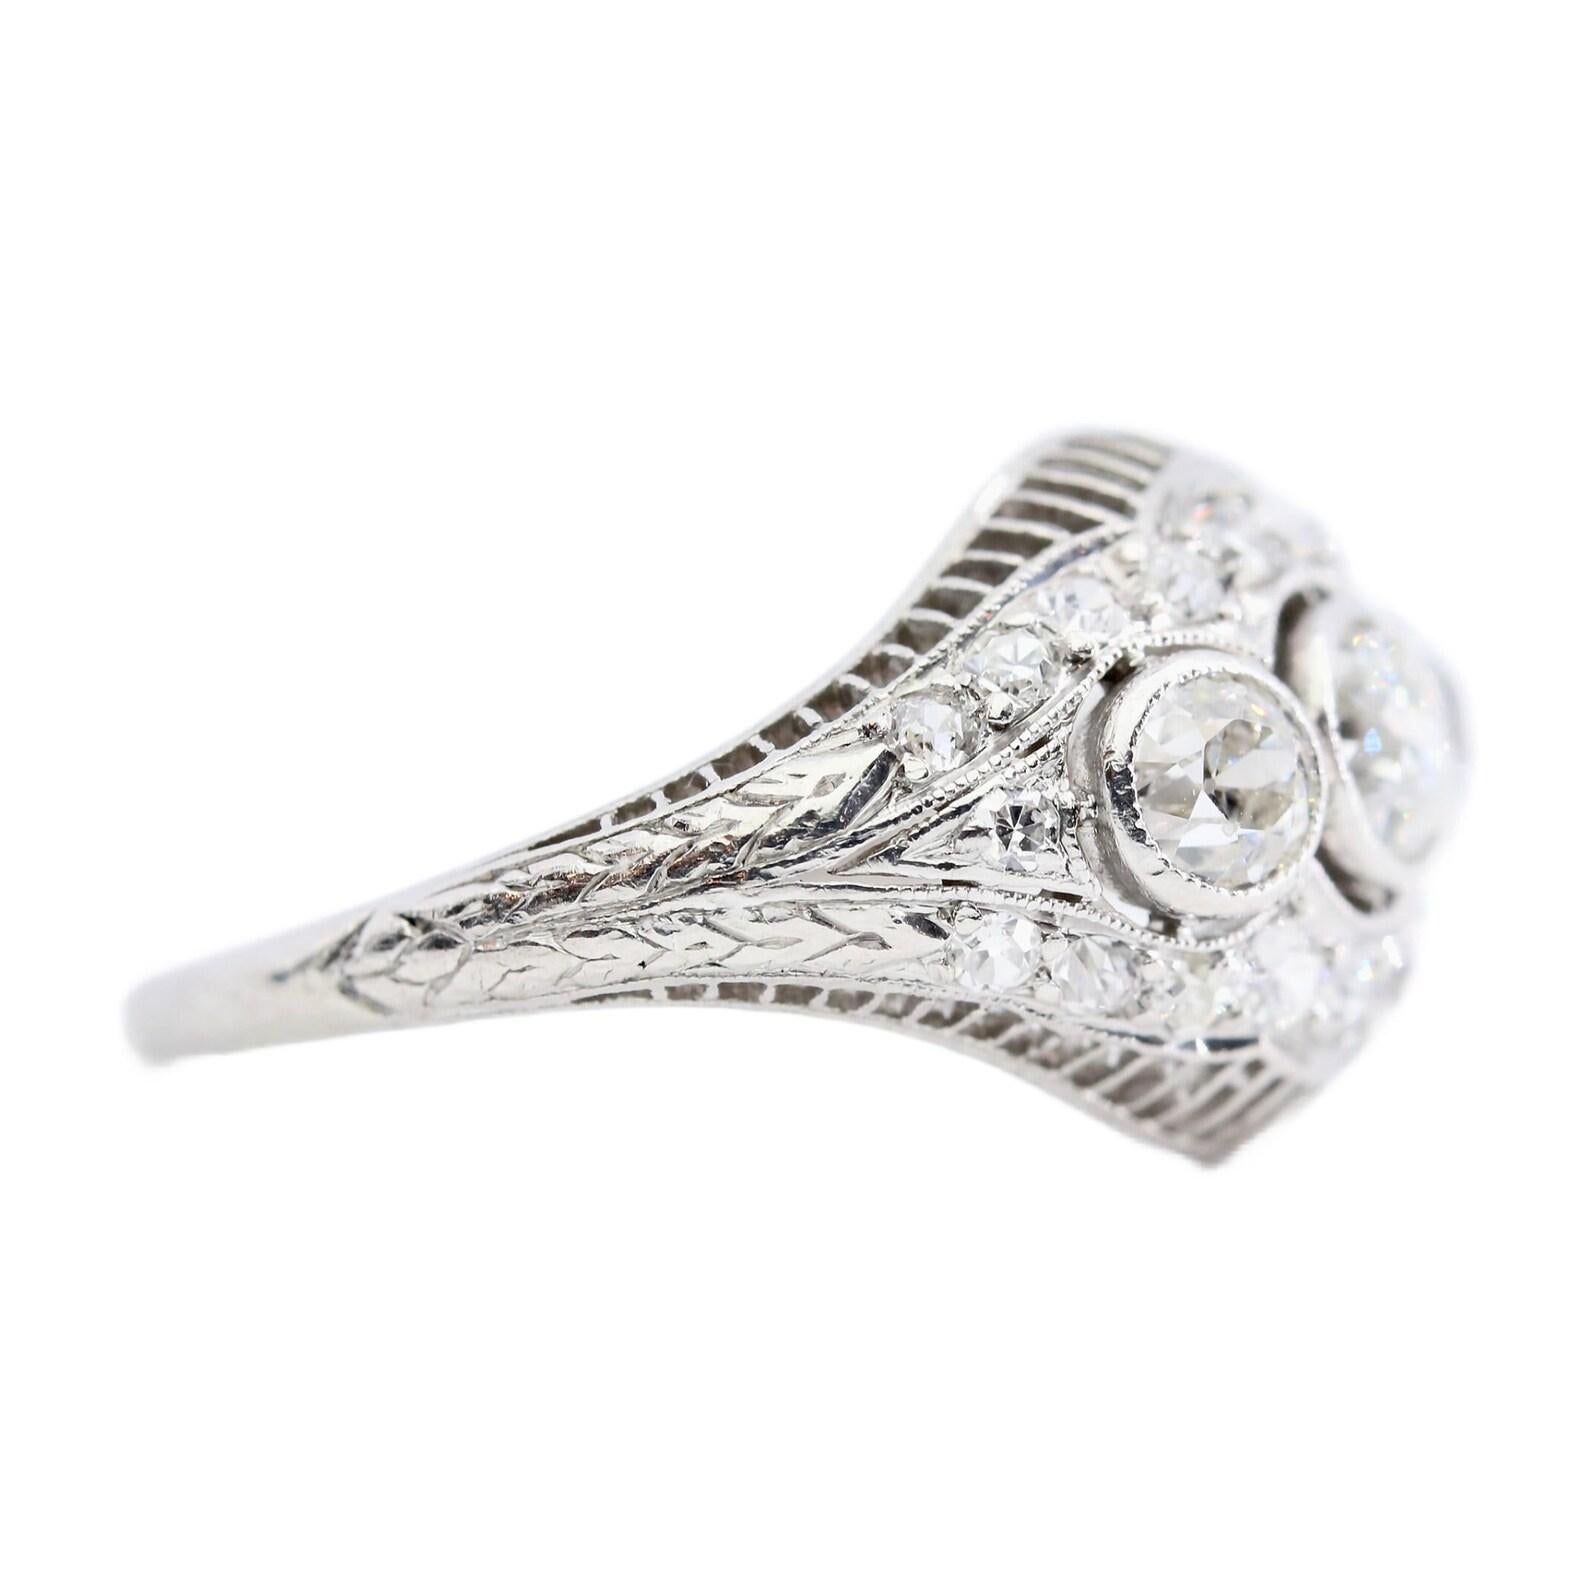 An Art Deco period three stone diamond ring crafted in platinum.

Centered by a trio of bezel set old European cut diamonds of 1.05ctw with H color and VS clarity. 

Accented throughout by a further 0.60 carats of pave set old European cut diamonds;